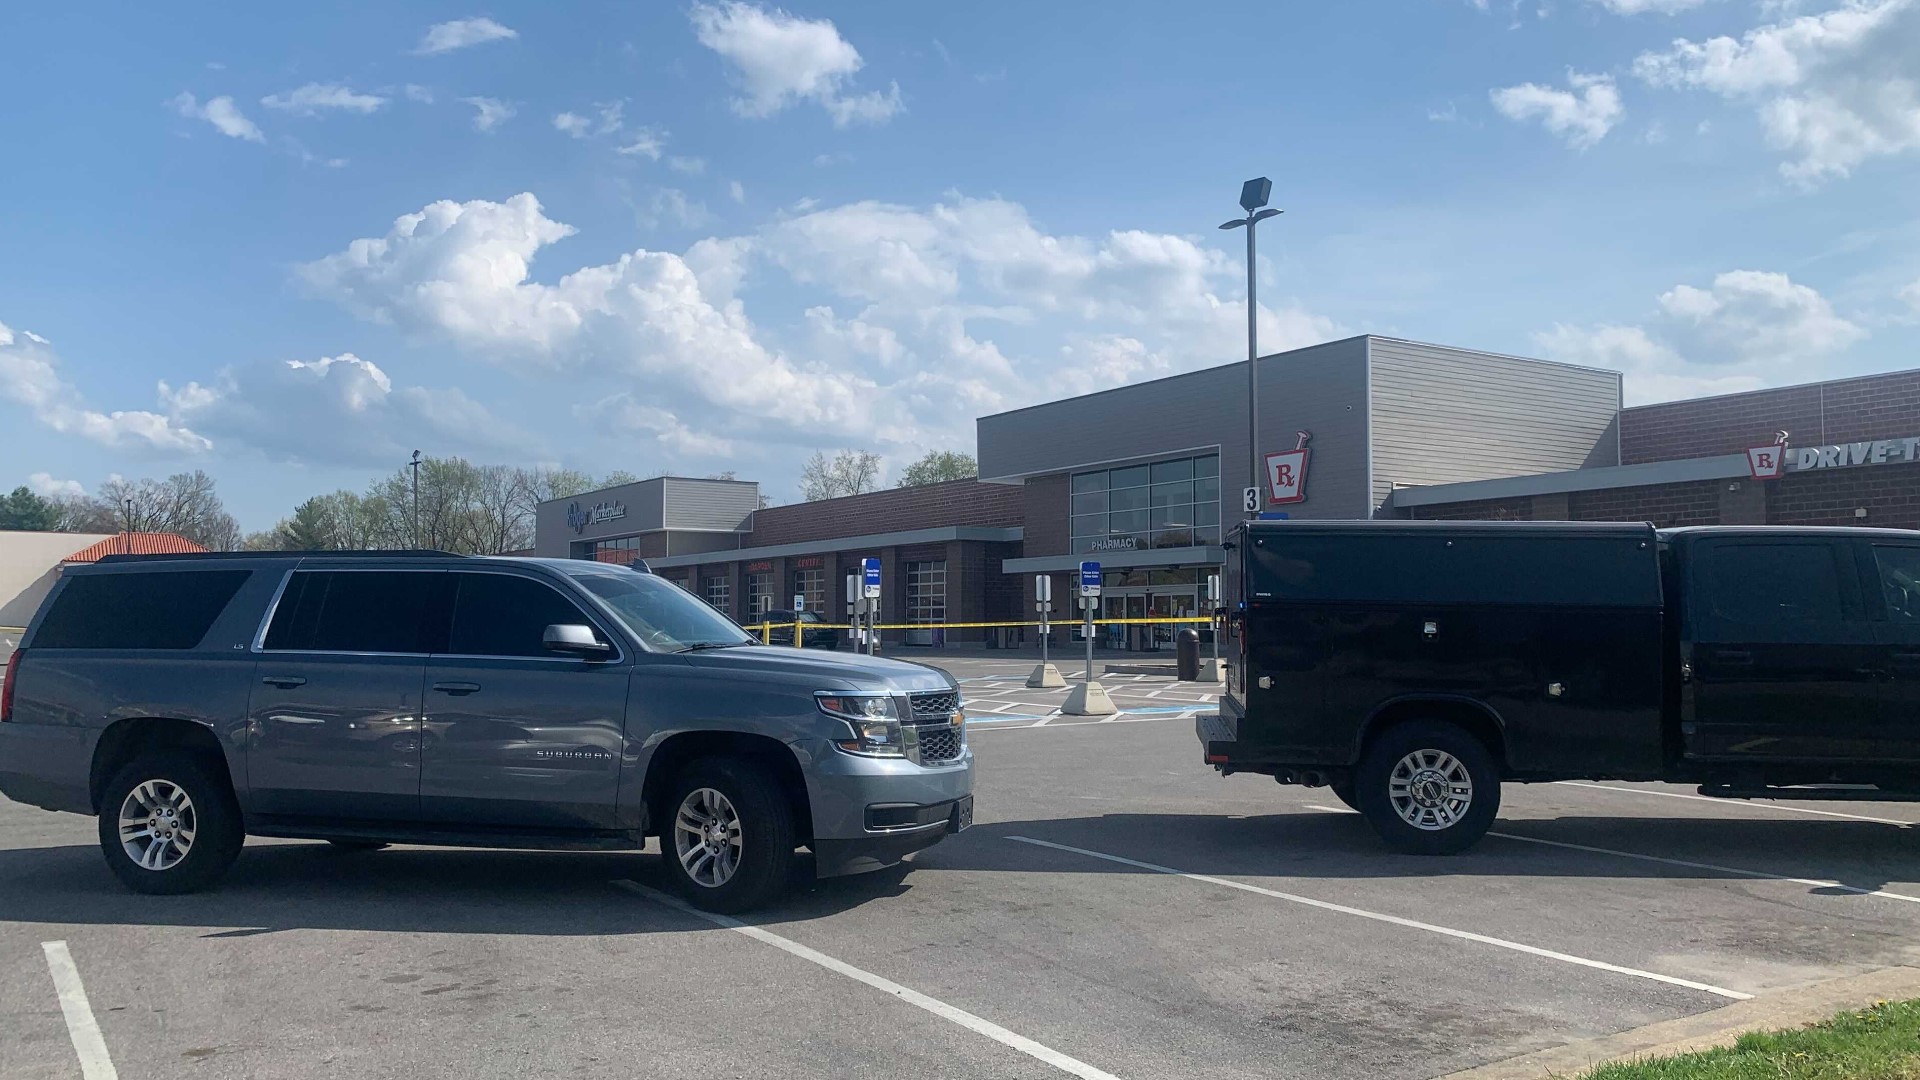 In a statement, Kroger said the store was evacuated "out of an abundance of caution" after "a suspicious package was left unattended."